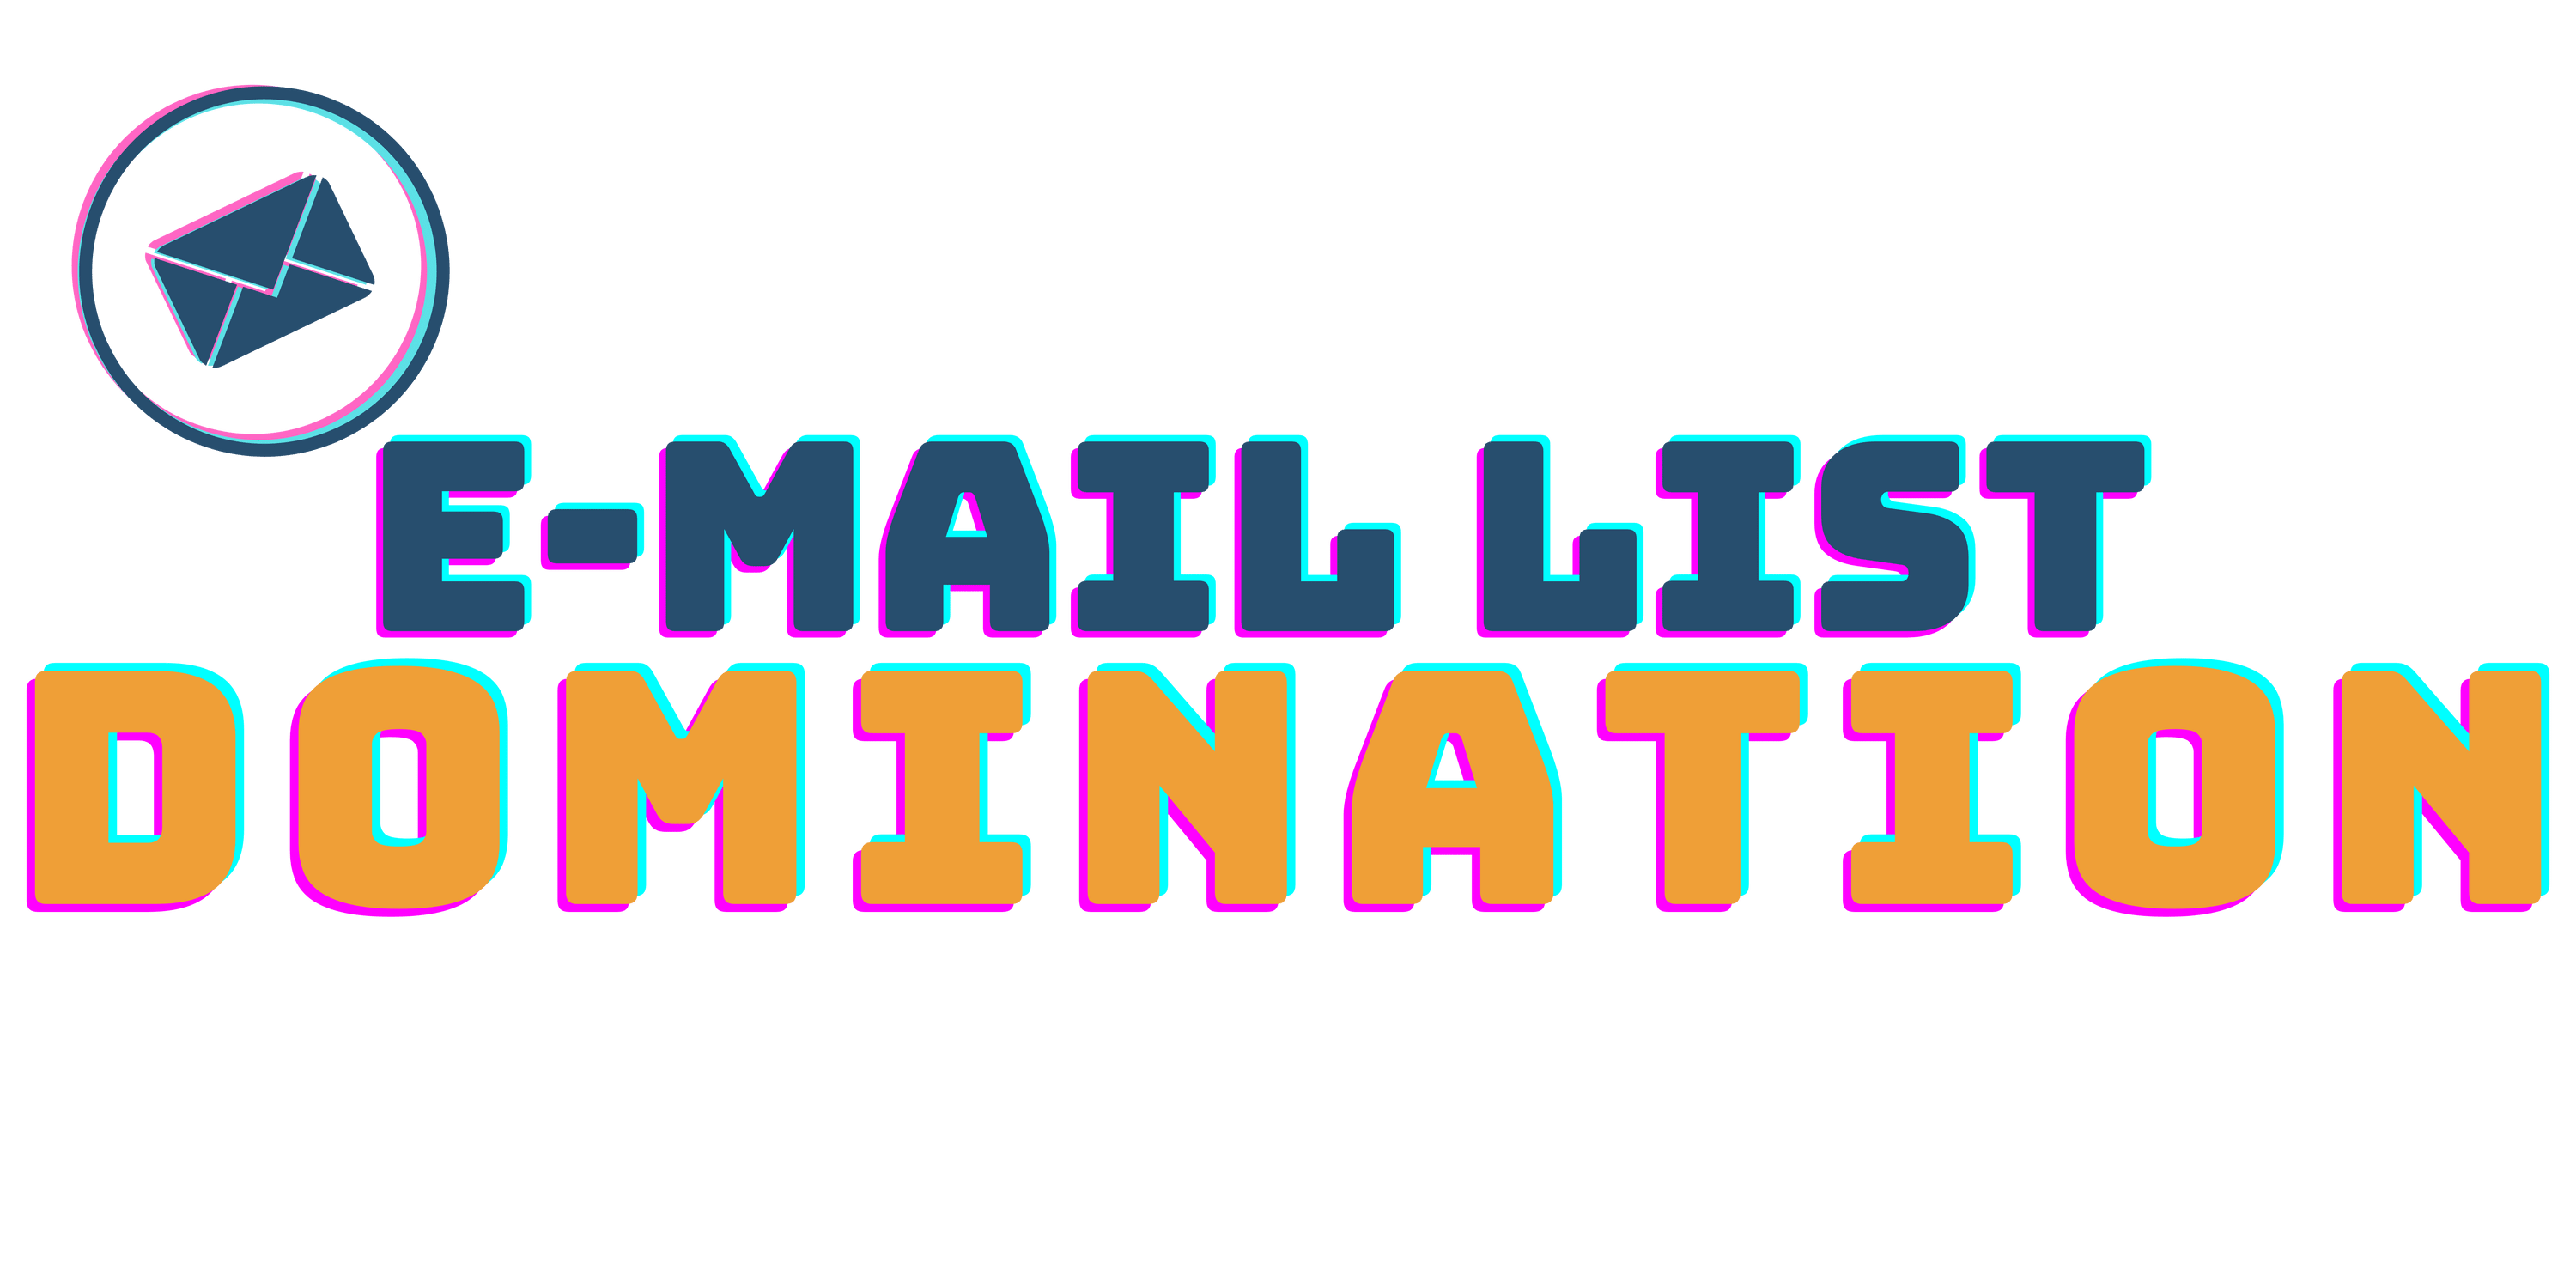 Email List Domination 